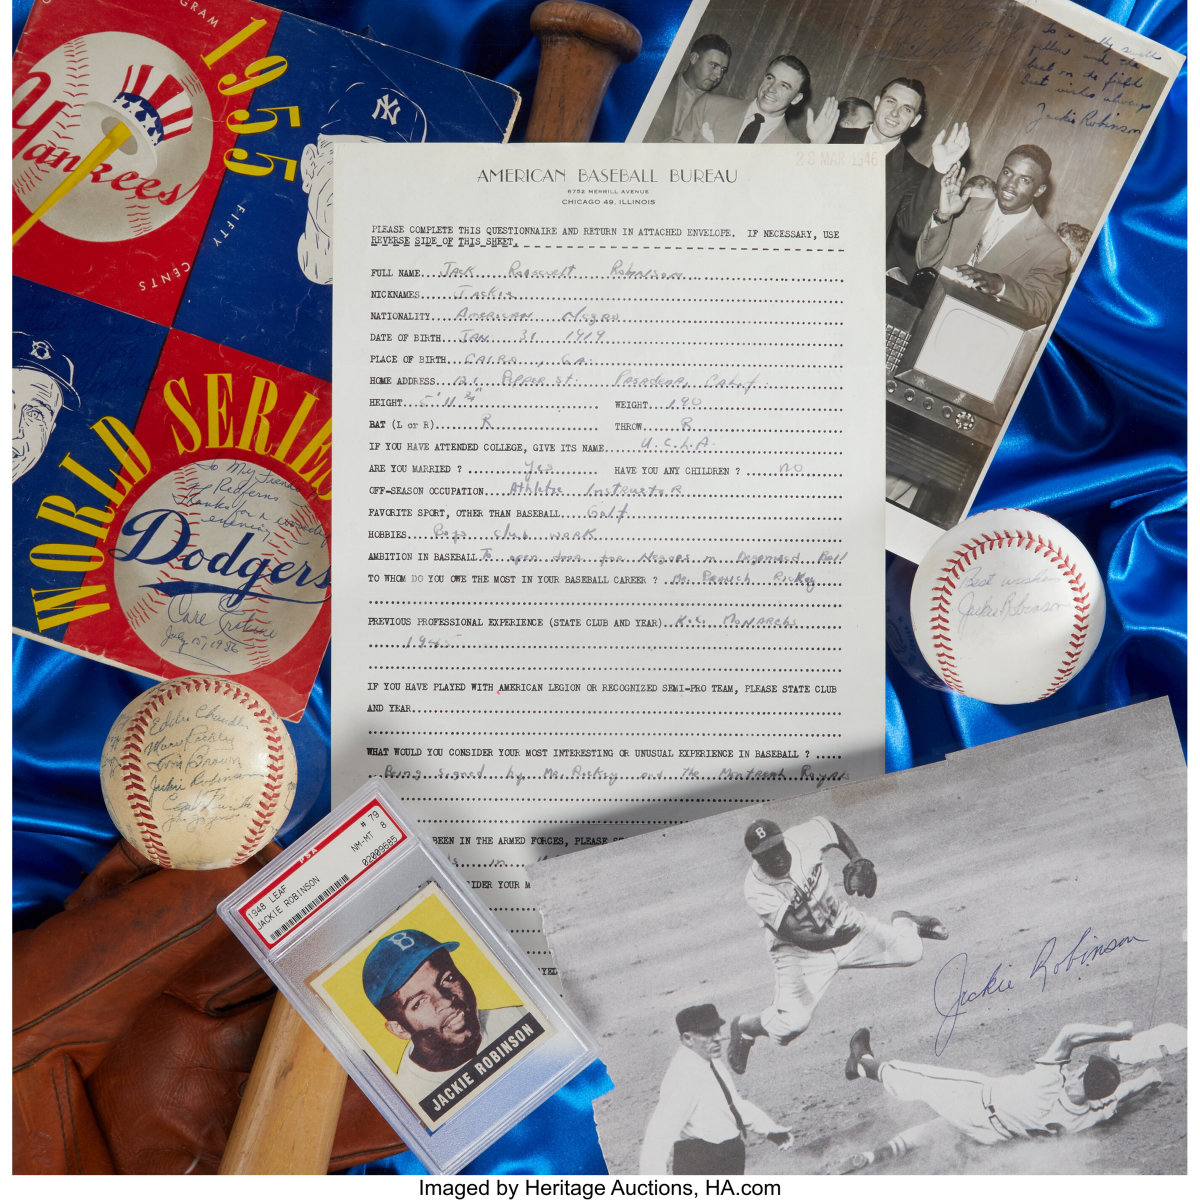 Jackie Robinson questionnaire, memorabilia in Heritage Auctions' Winter Sports Auction.